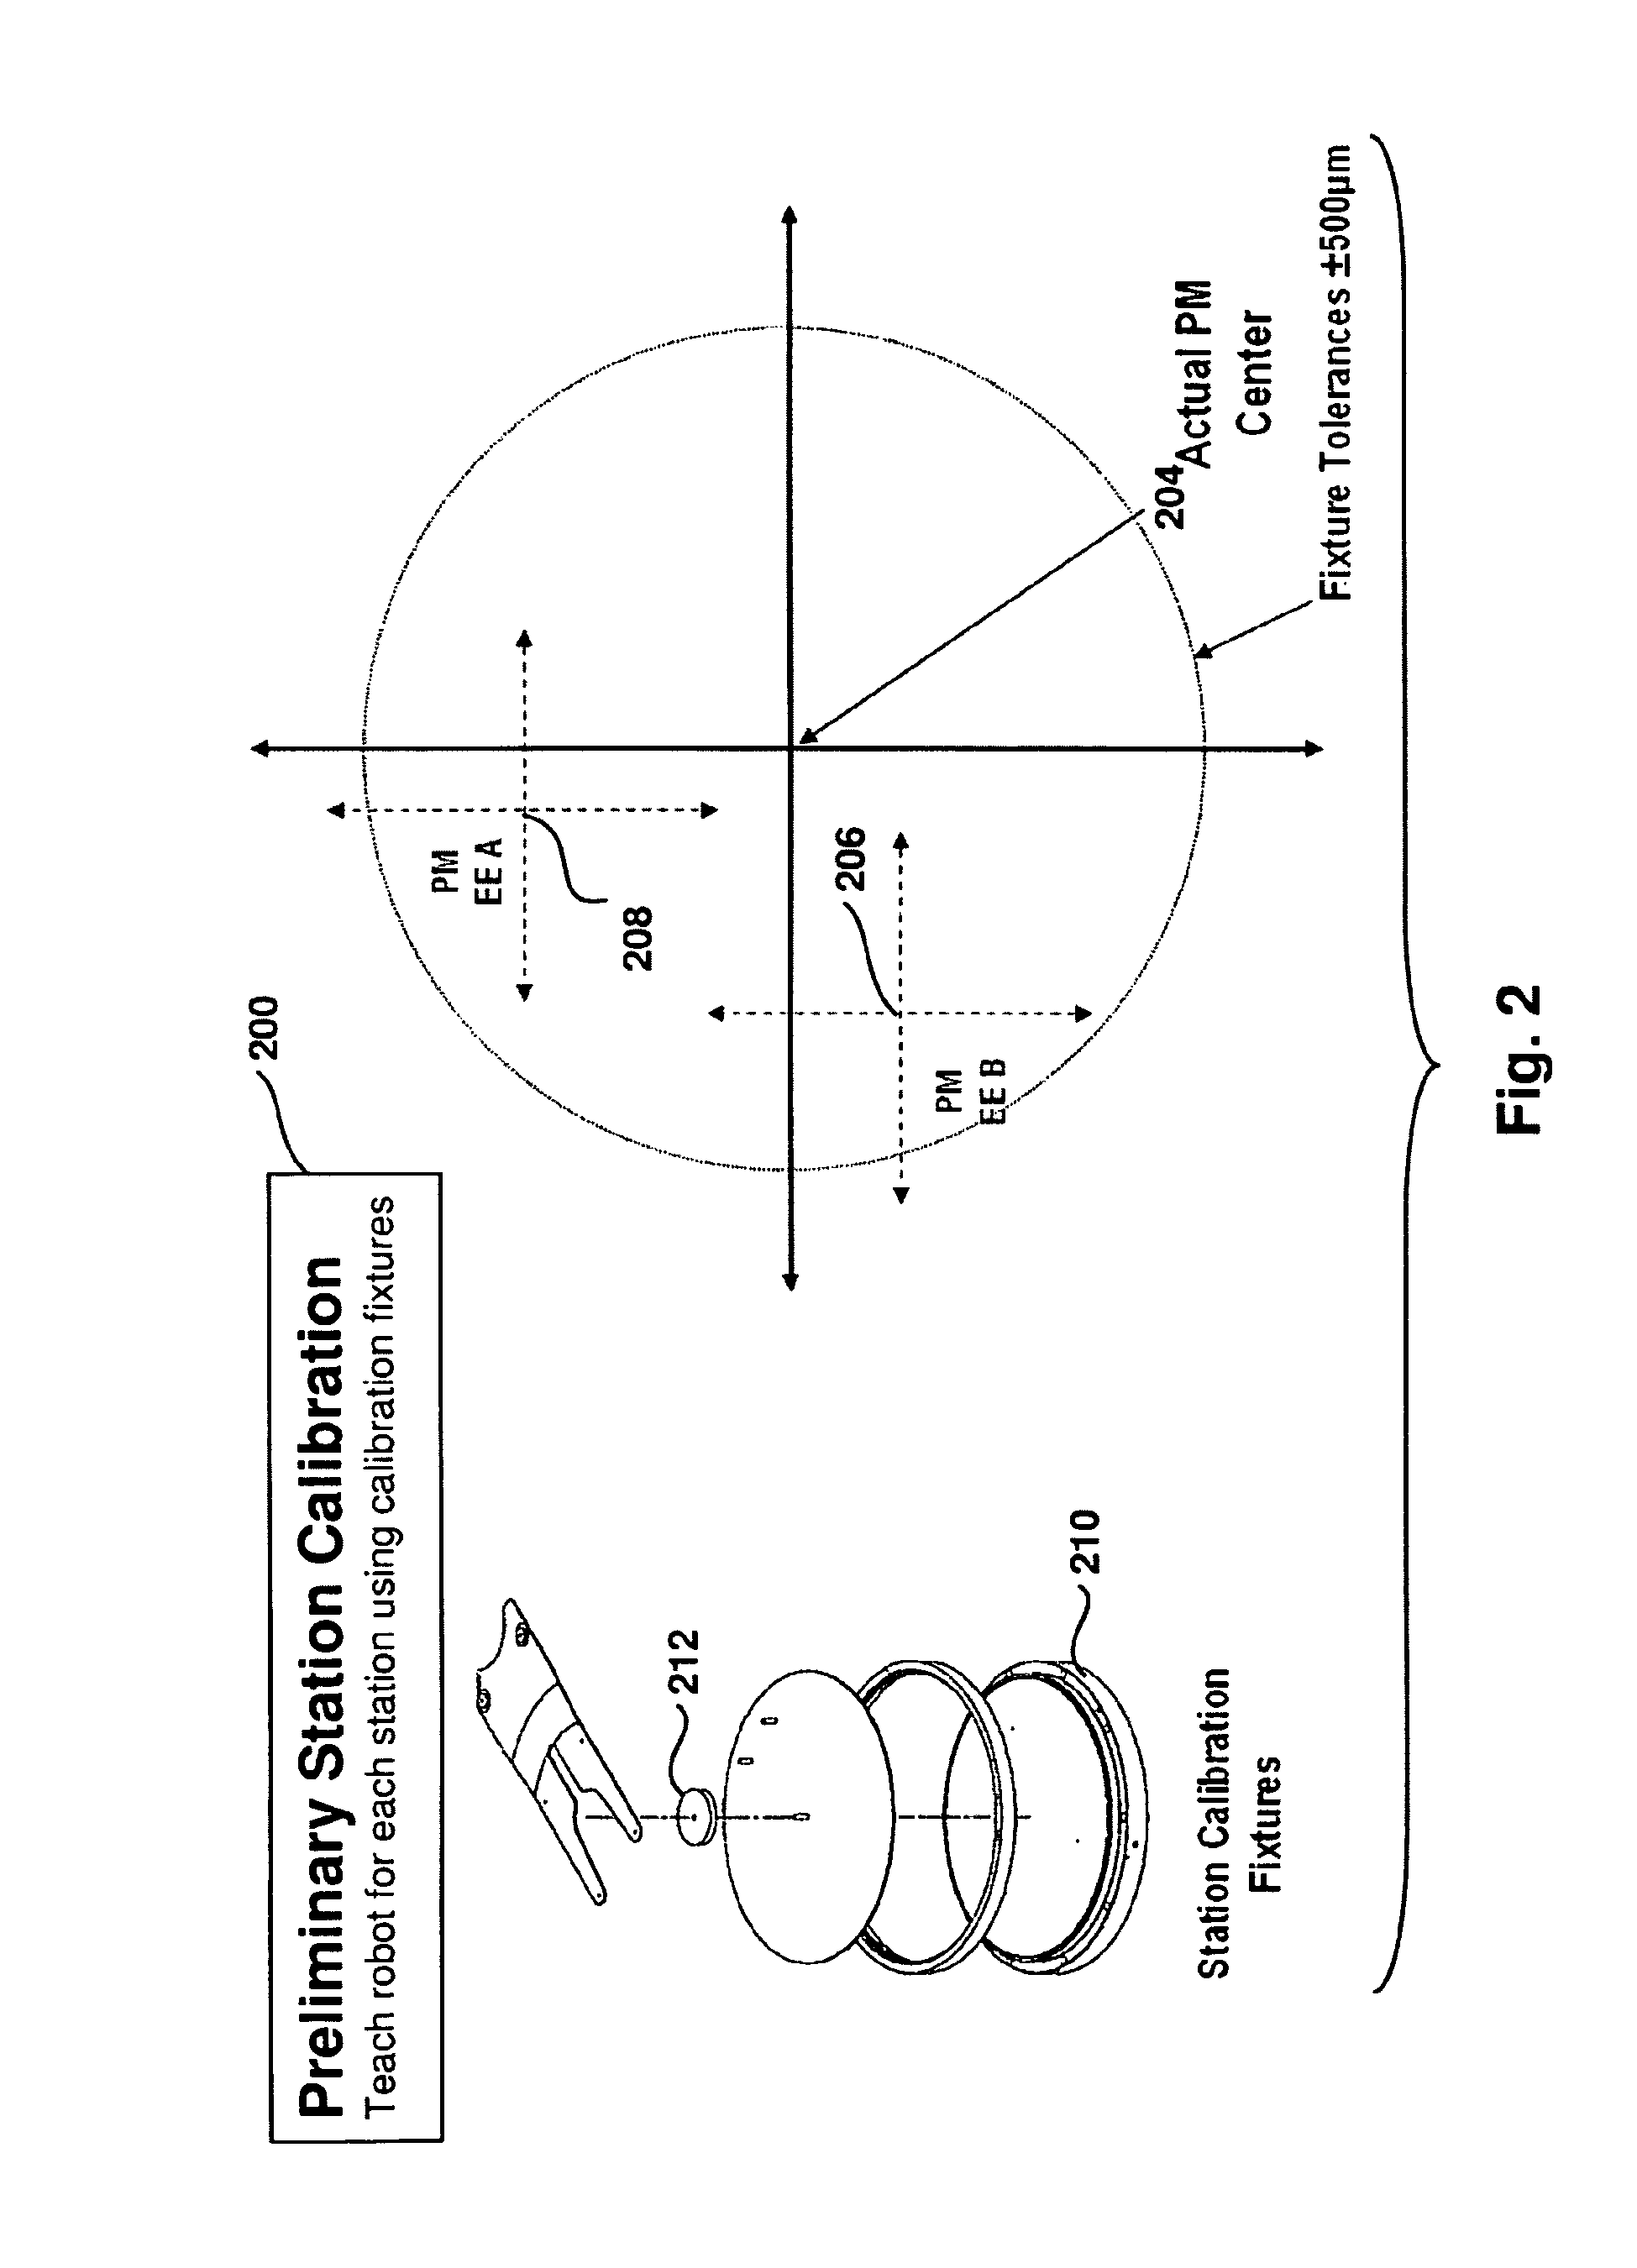 Dynamic alignment of wafers using compensation values obtained through a series of wafer movements